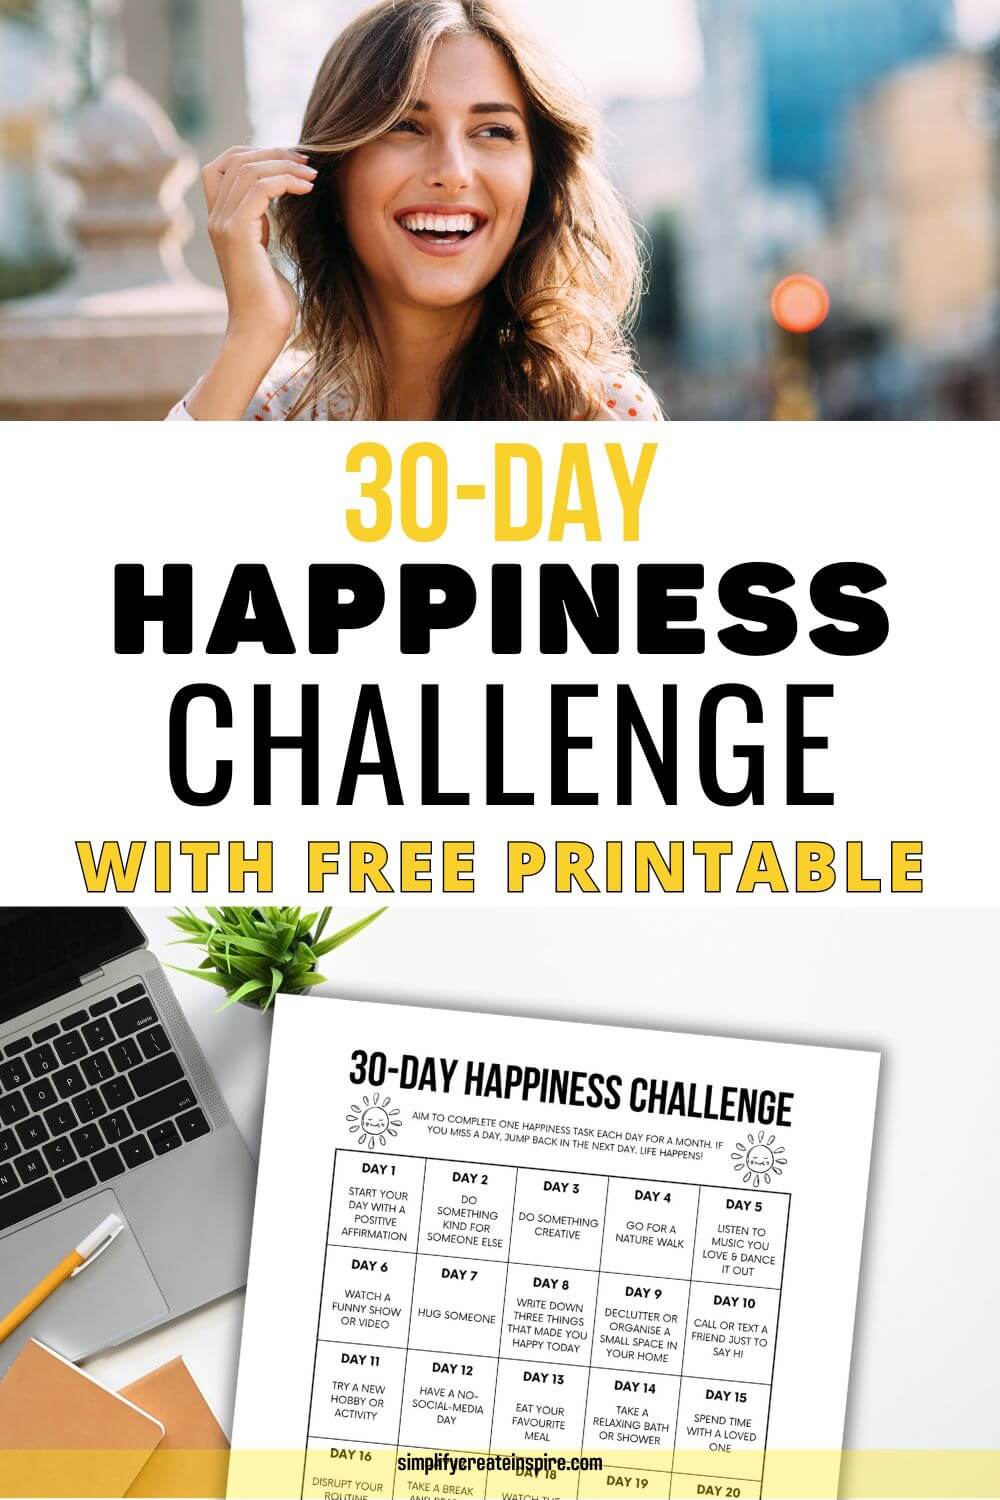 30-day happiness challenge with free printable.